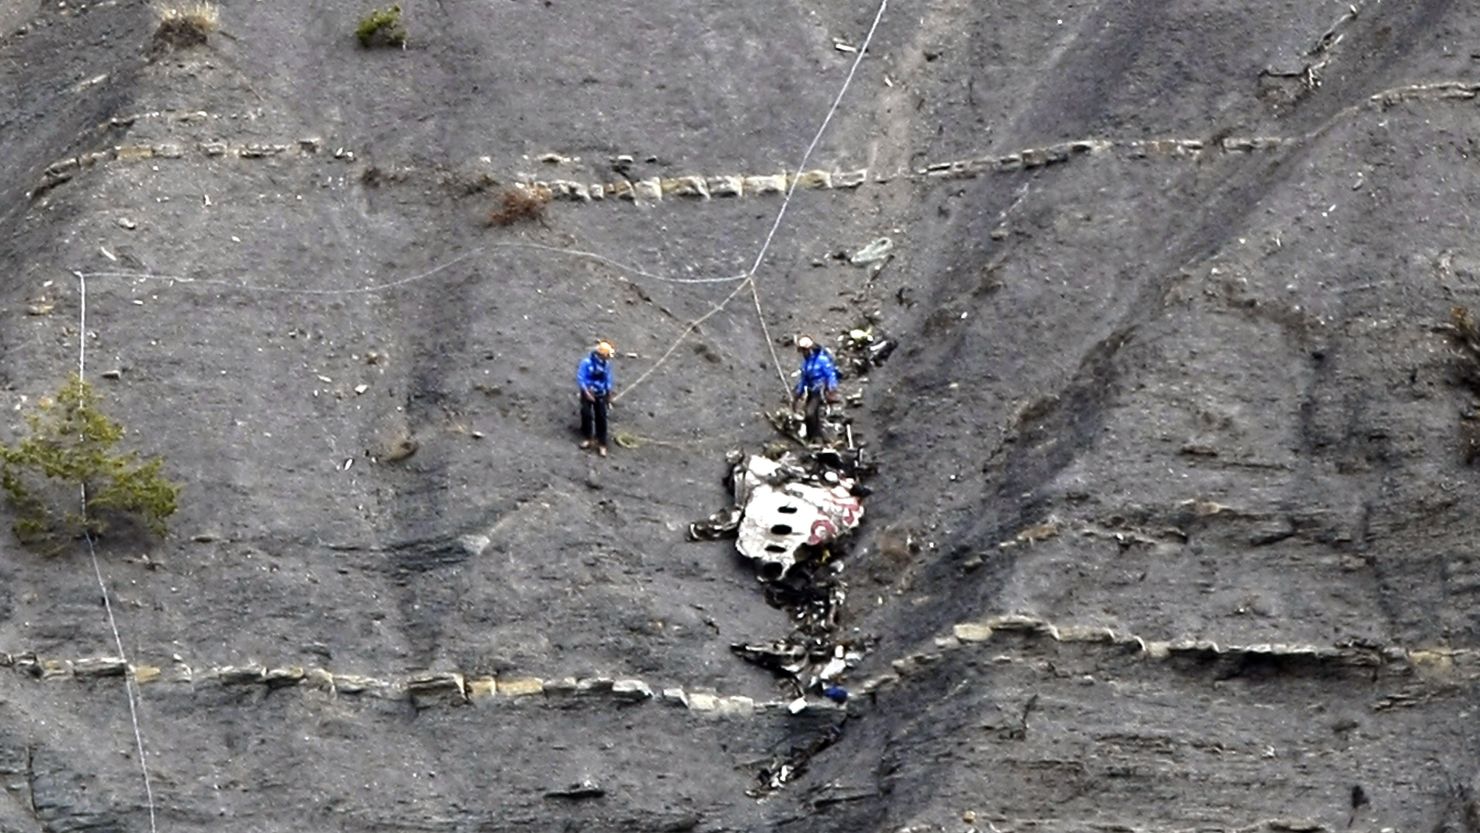 Workers recover items at the crash site of the Germanwings Airbus A320 near Seyne-les-Alpes, France, on March 30, 2015.